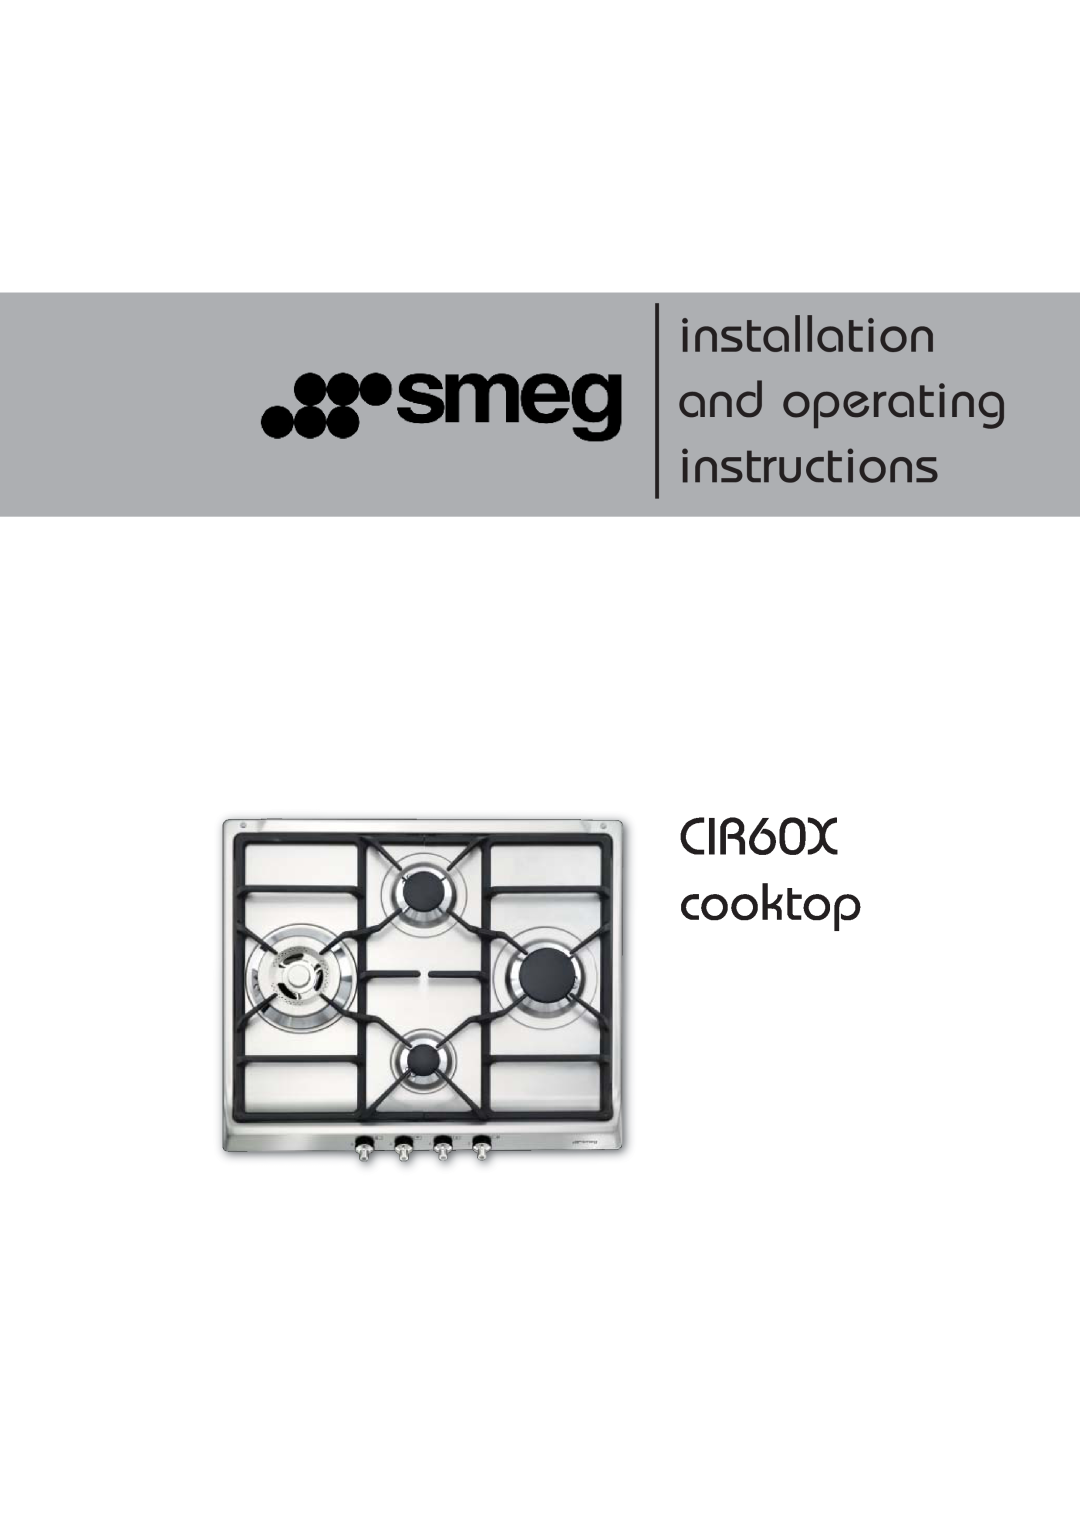 Smeg manual installation and operating instructions CIR60X cooktop 